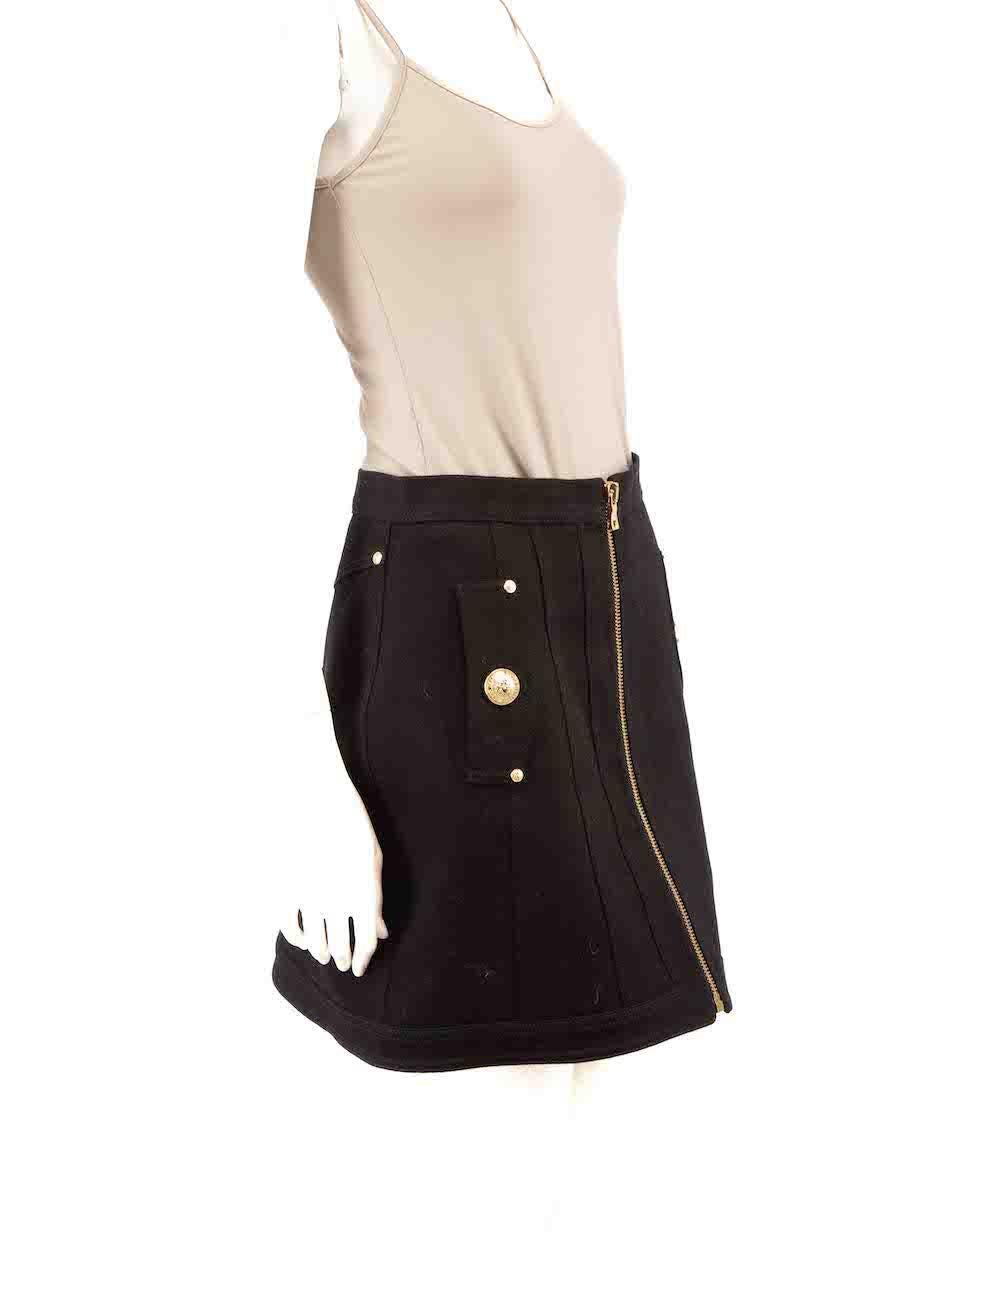 CONDITION is Very good. Hardly any visible wear to skirt is evident on this used Balmain designer resale item.
 
 
 
 Details
 
 
 Black
 
 Cotton
 
 A-line skirt
 
 Mini length
 
 Front zip closure
 
 2x Front side pockets with button detail
 
 2x